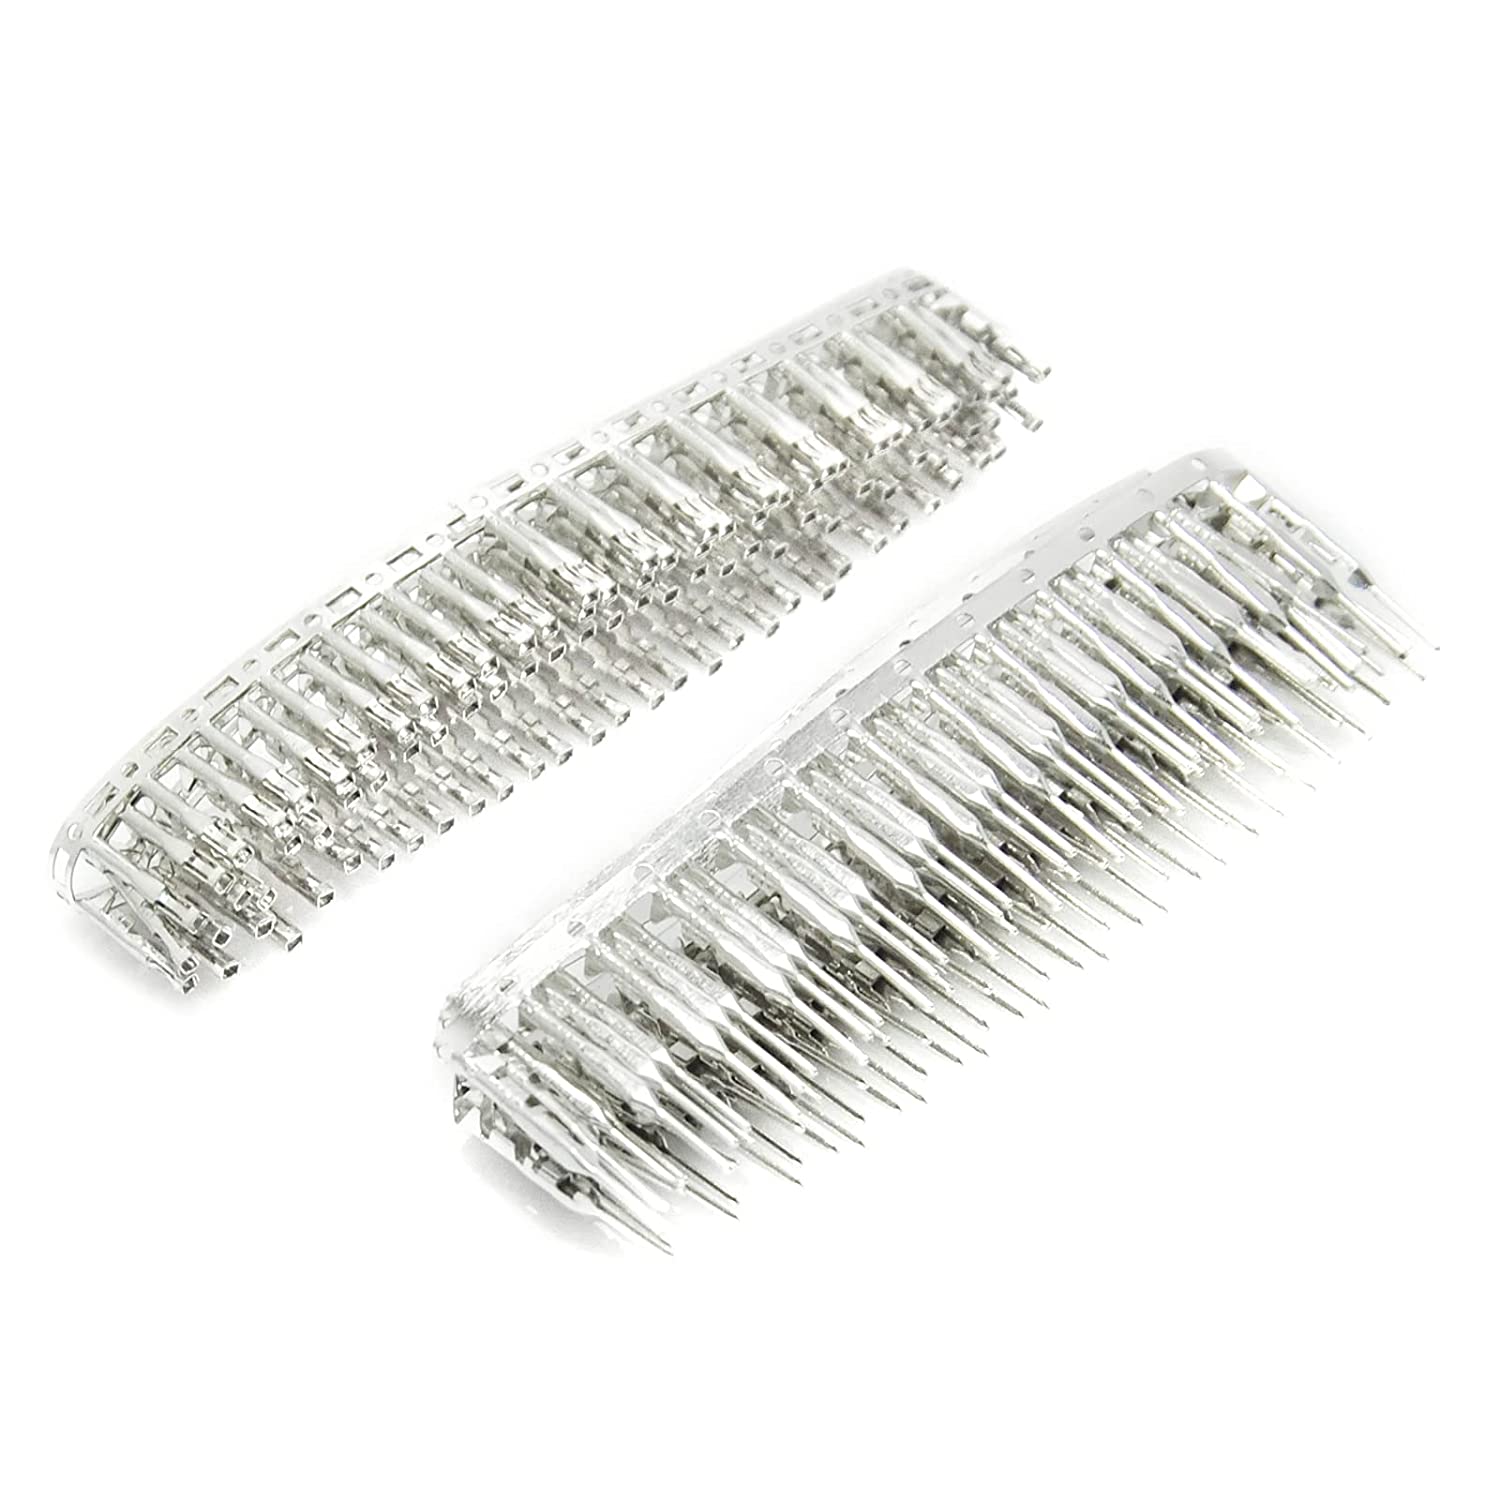 Male / Female Dupont Connector 2.54mm Male or Female Crimp Pins